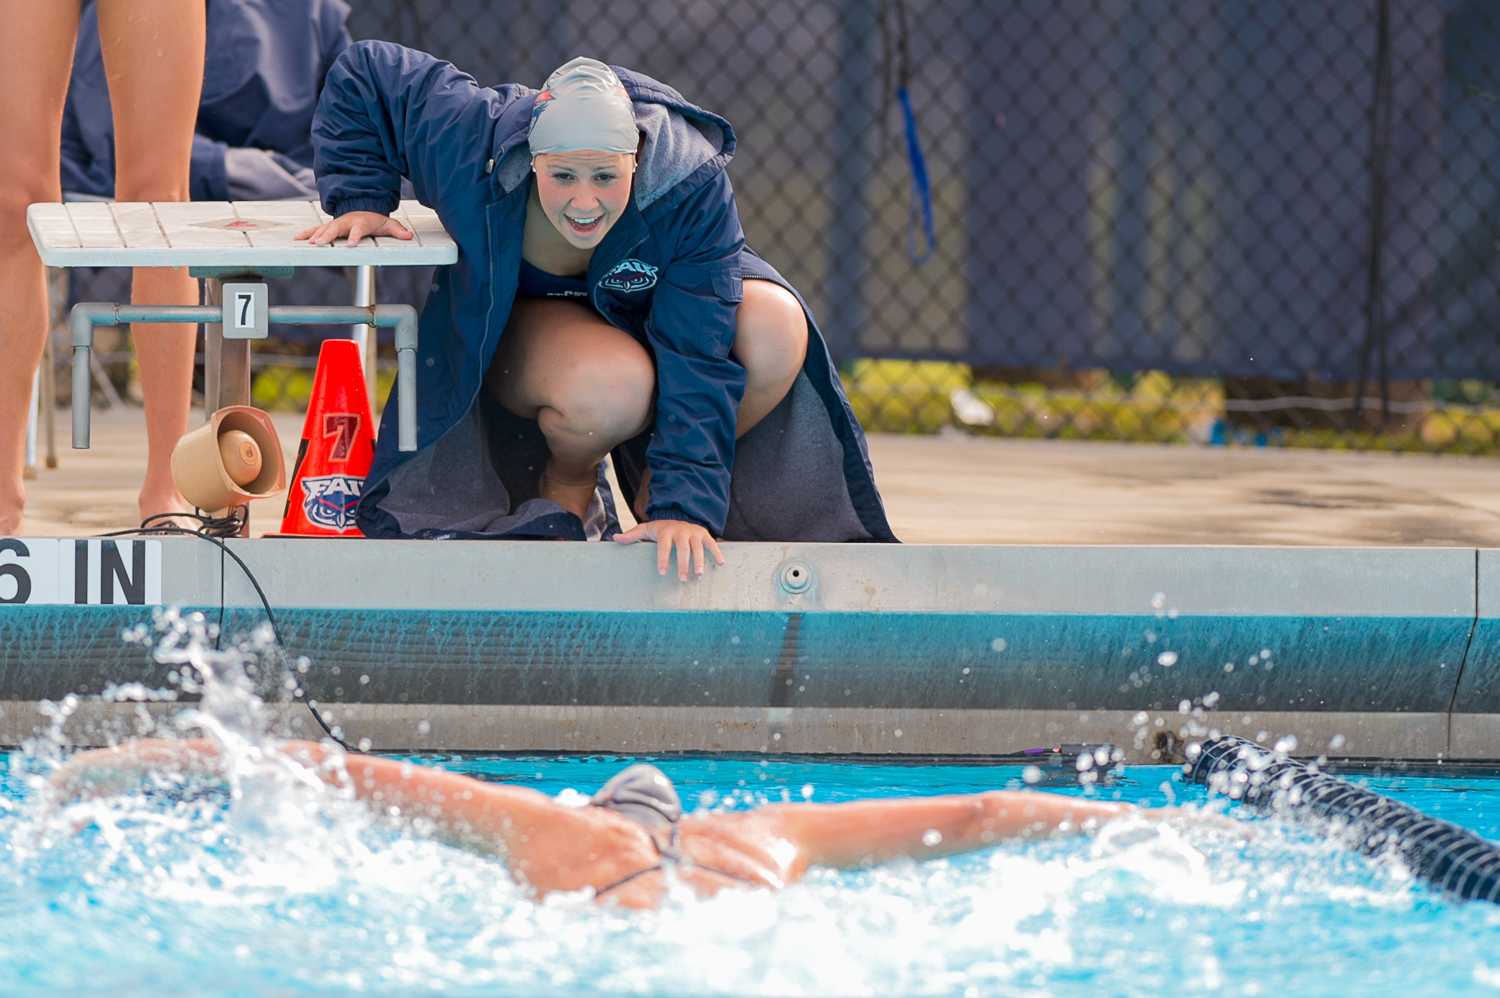 Sahra El-Hamaki cheers on her teammate in the final stretch of the women’s 200 yard butterfly.